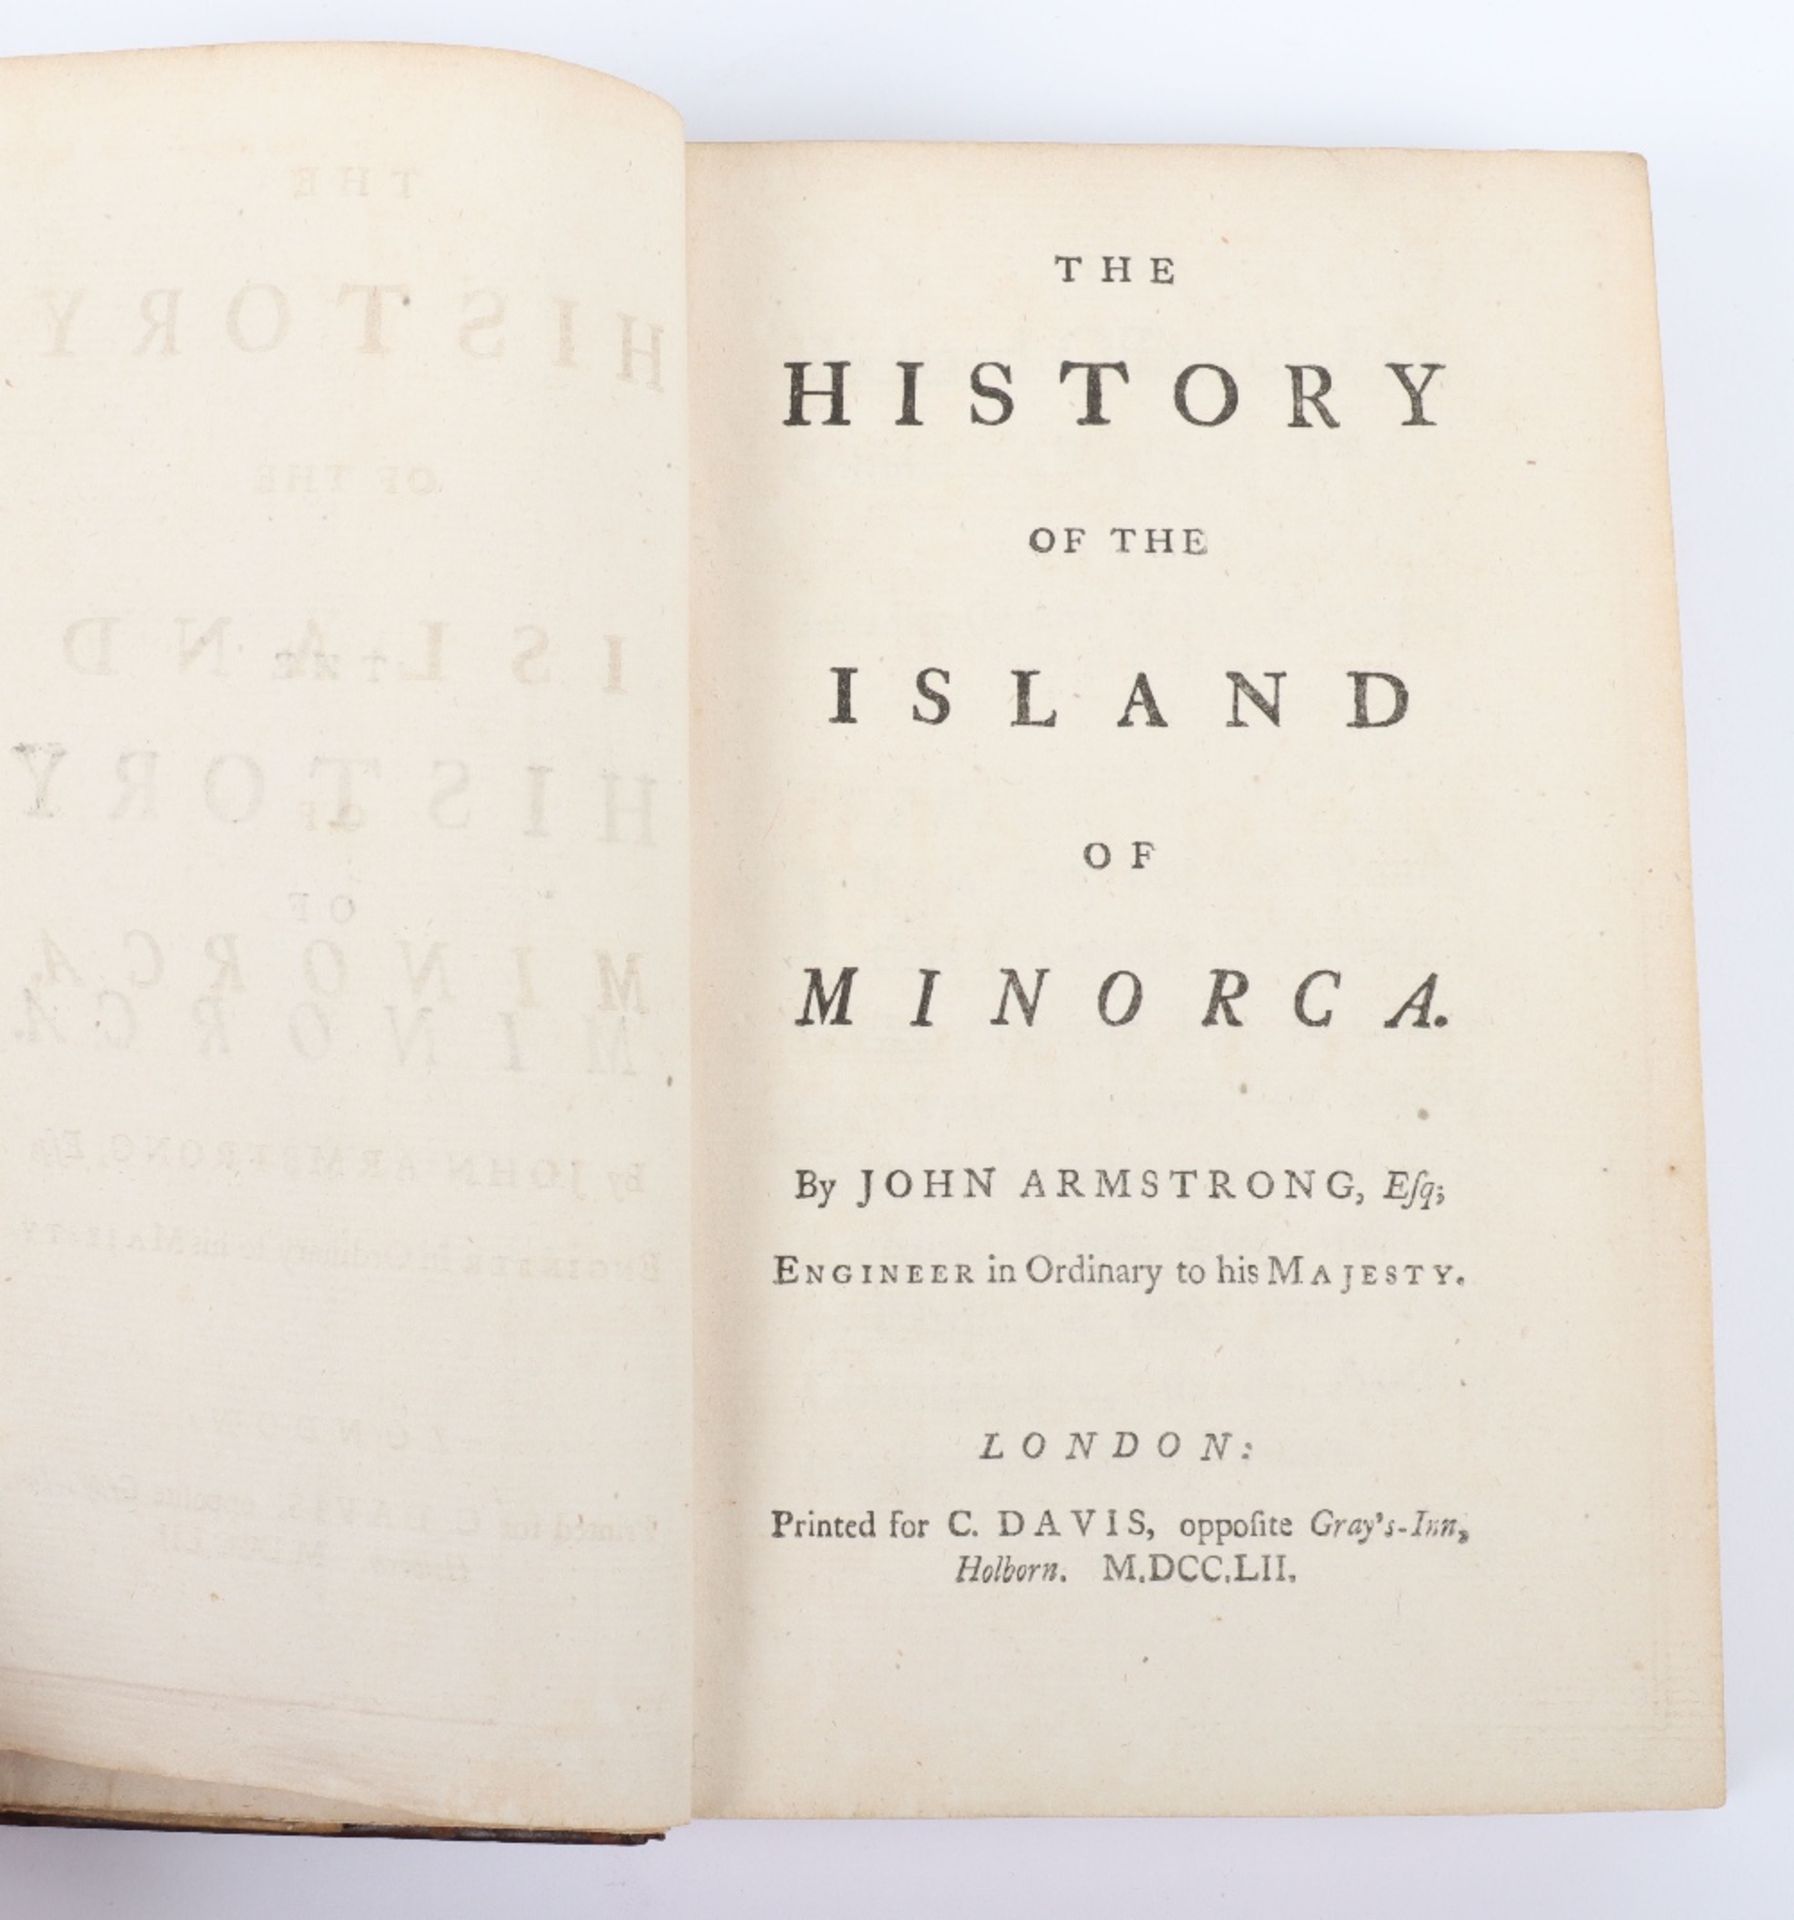 Collection of Early and Interesting Books on the History of Minorca - Image 4 of 9